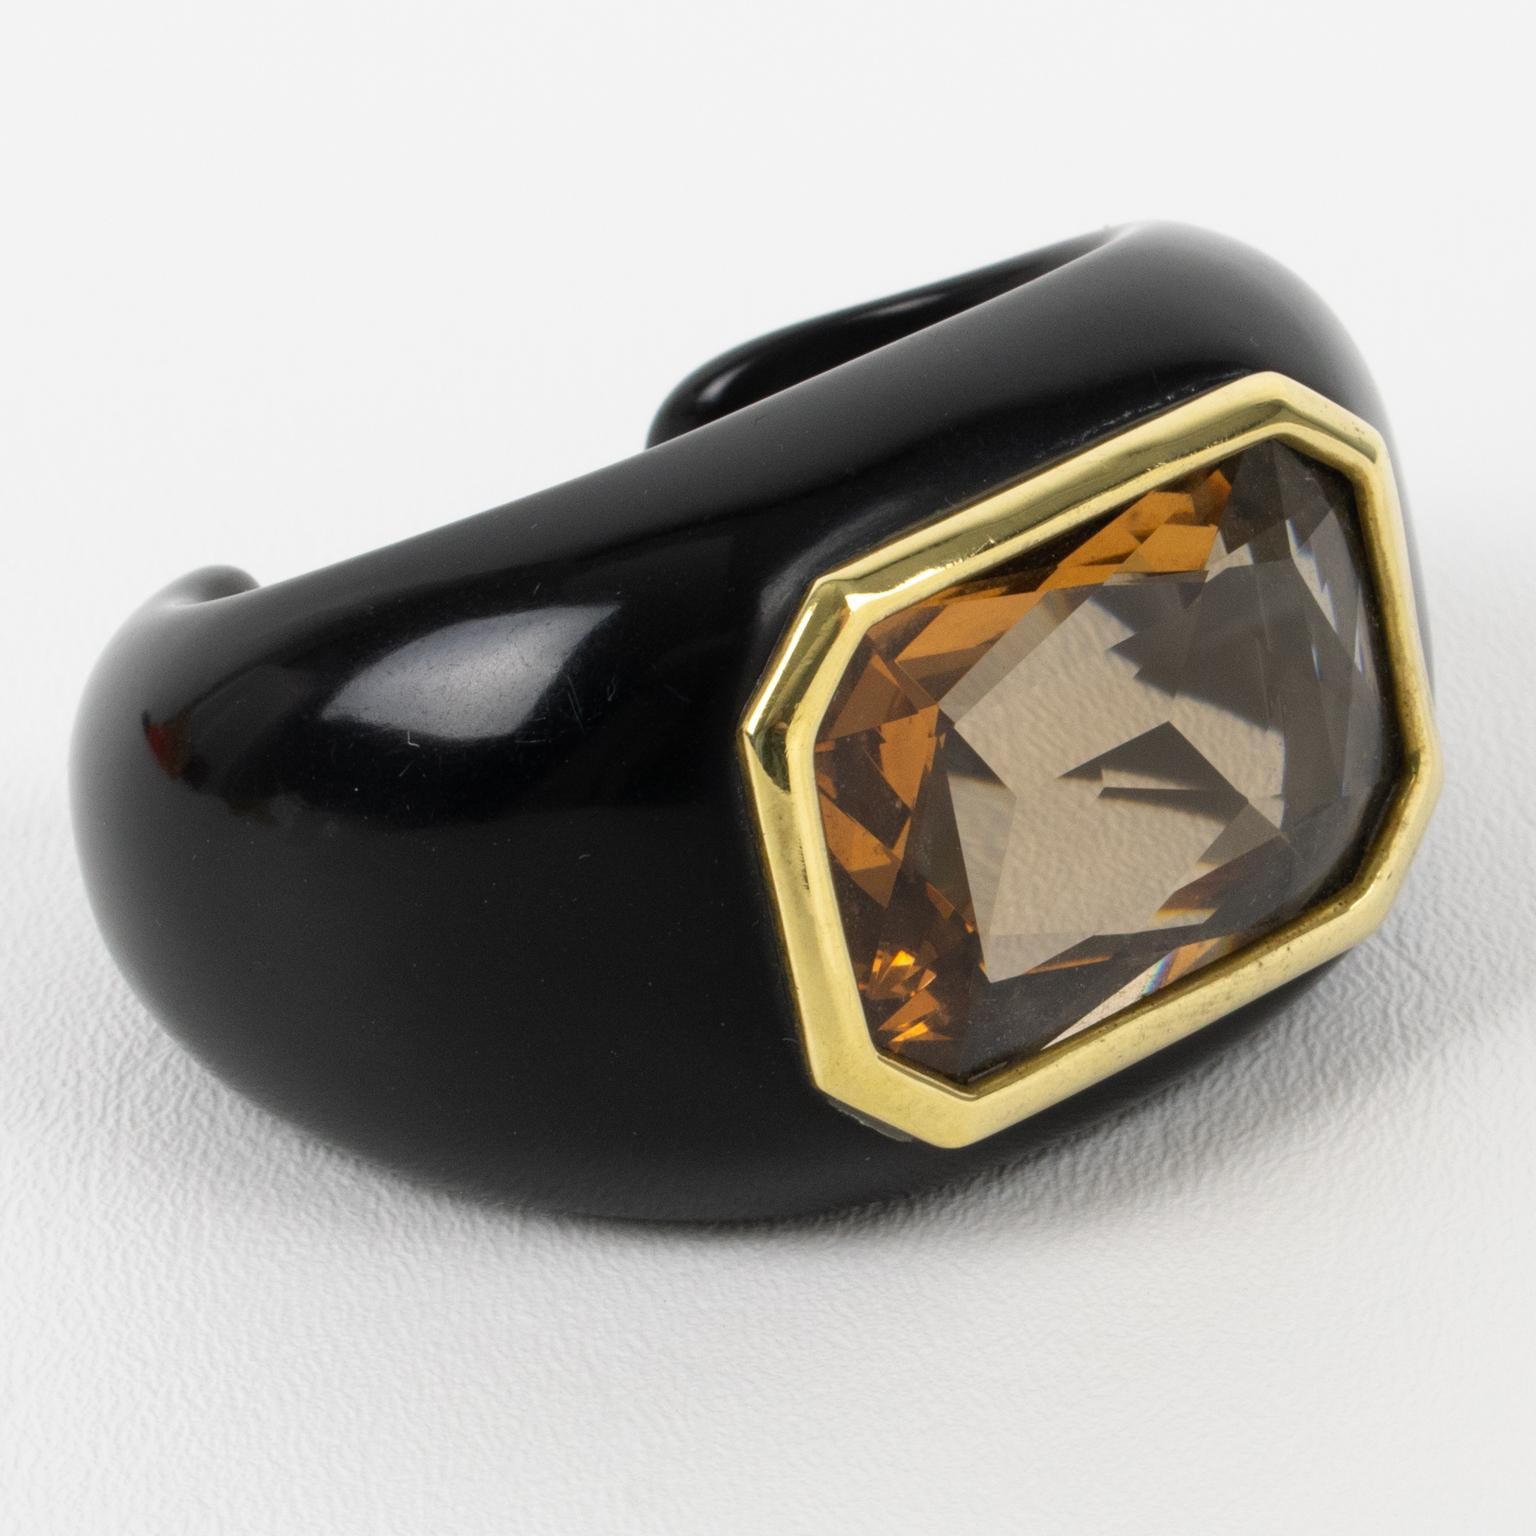 This stunning Daniel Swarovski Paris jeweled Lucite cuff bracelet is an incredible piece. French artist Aline Gui is the designer of this bracelet for Daniel Swarovski. The piece features a black Lucite cuff shape, topped with a massive crystal cut